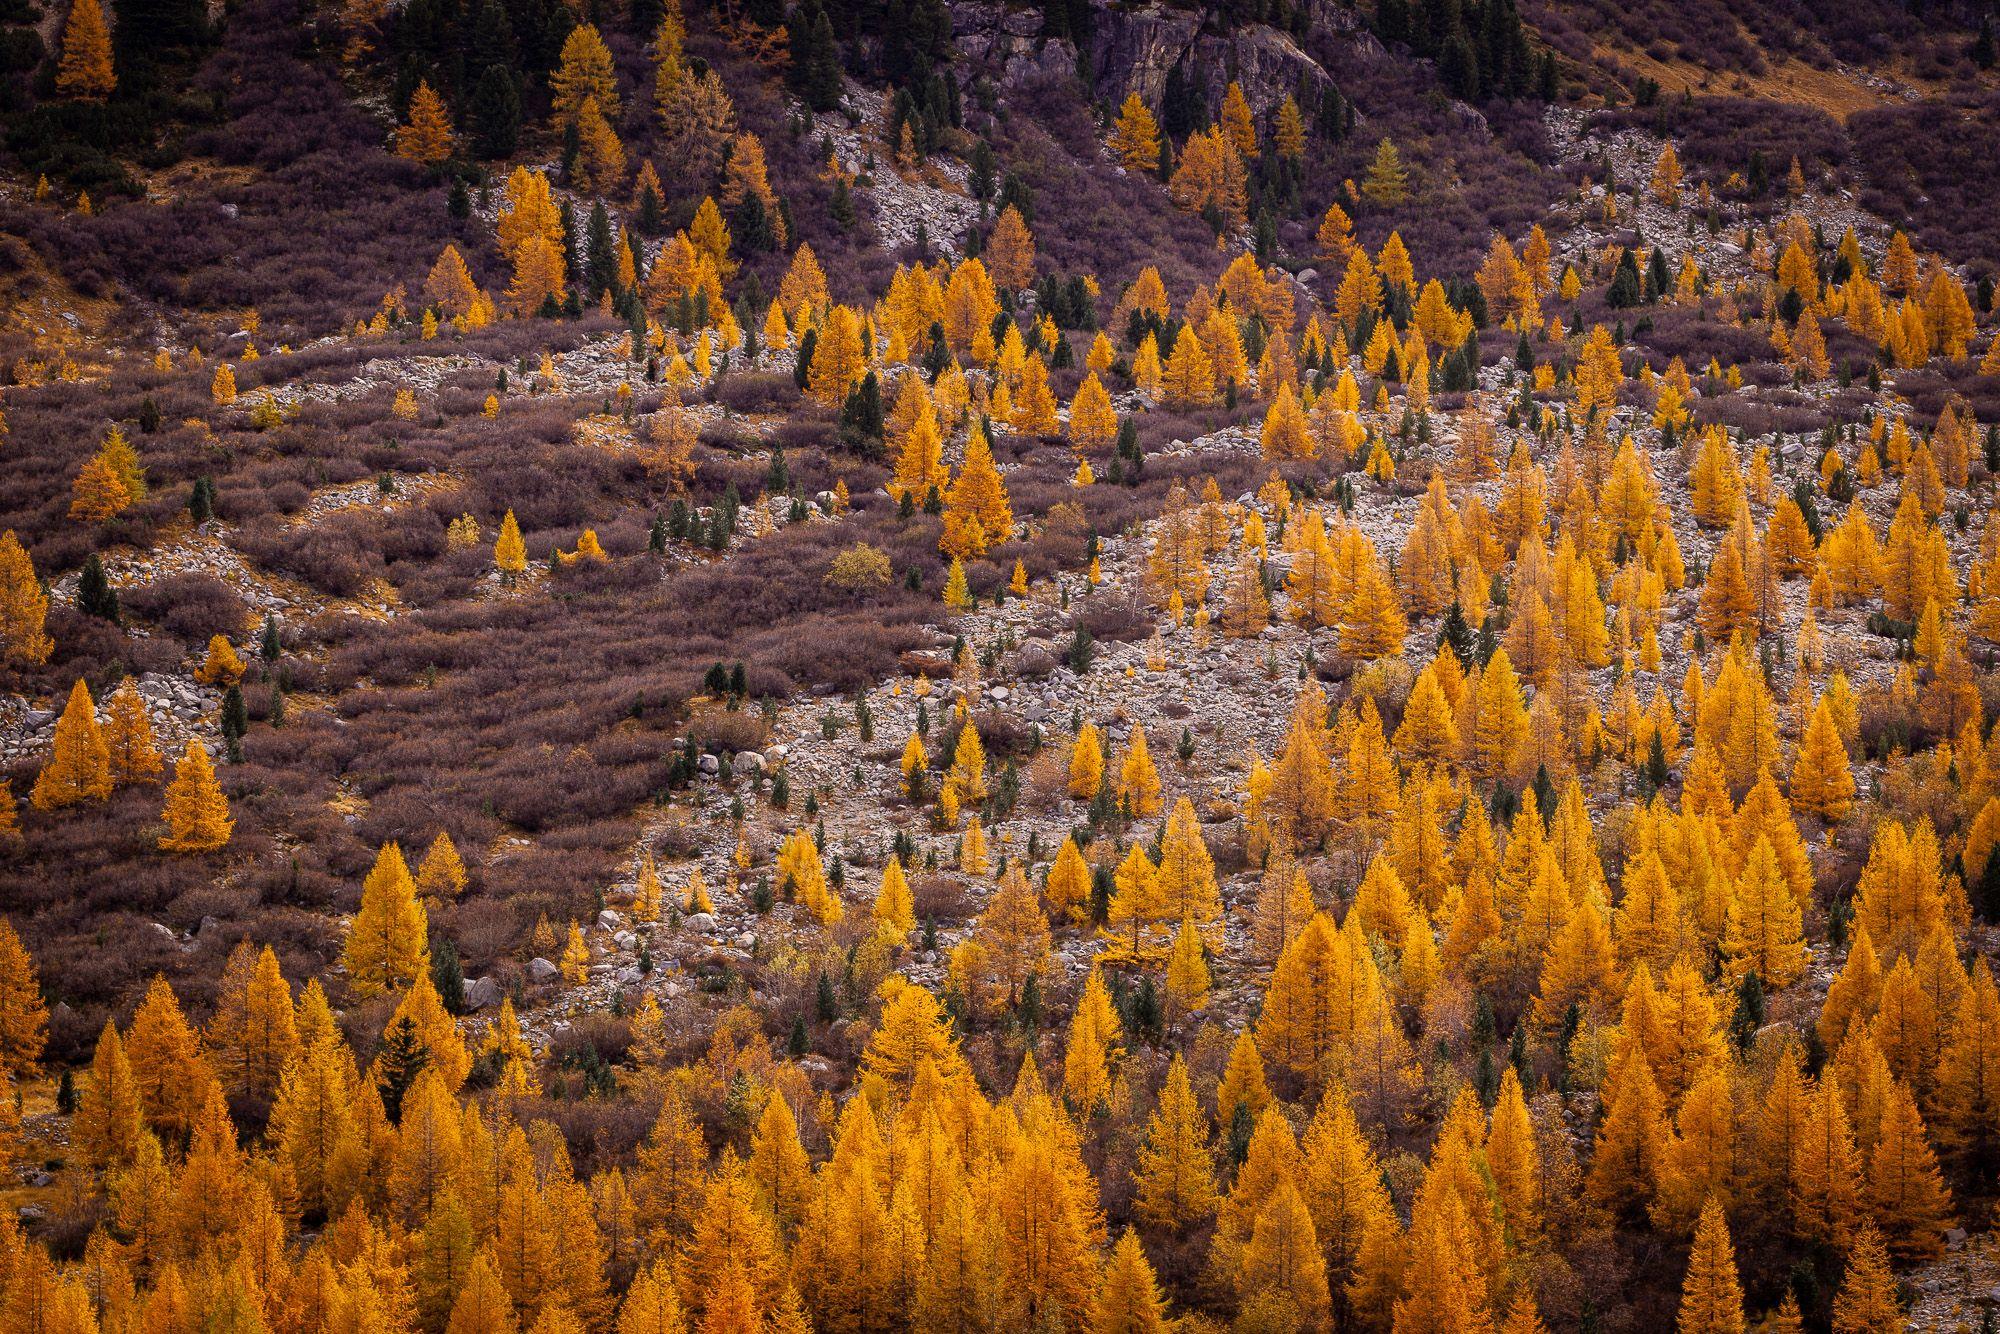 October 2022 – Larch forests